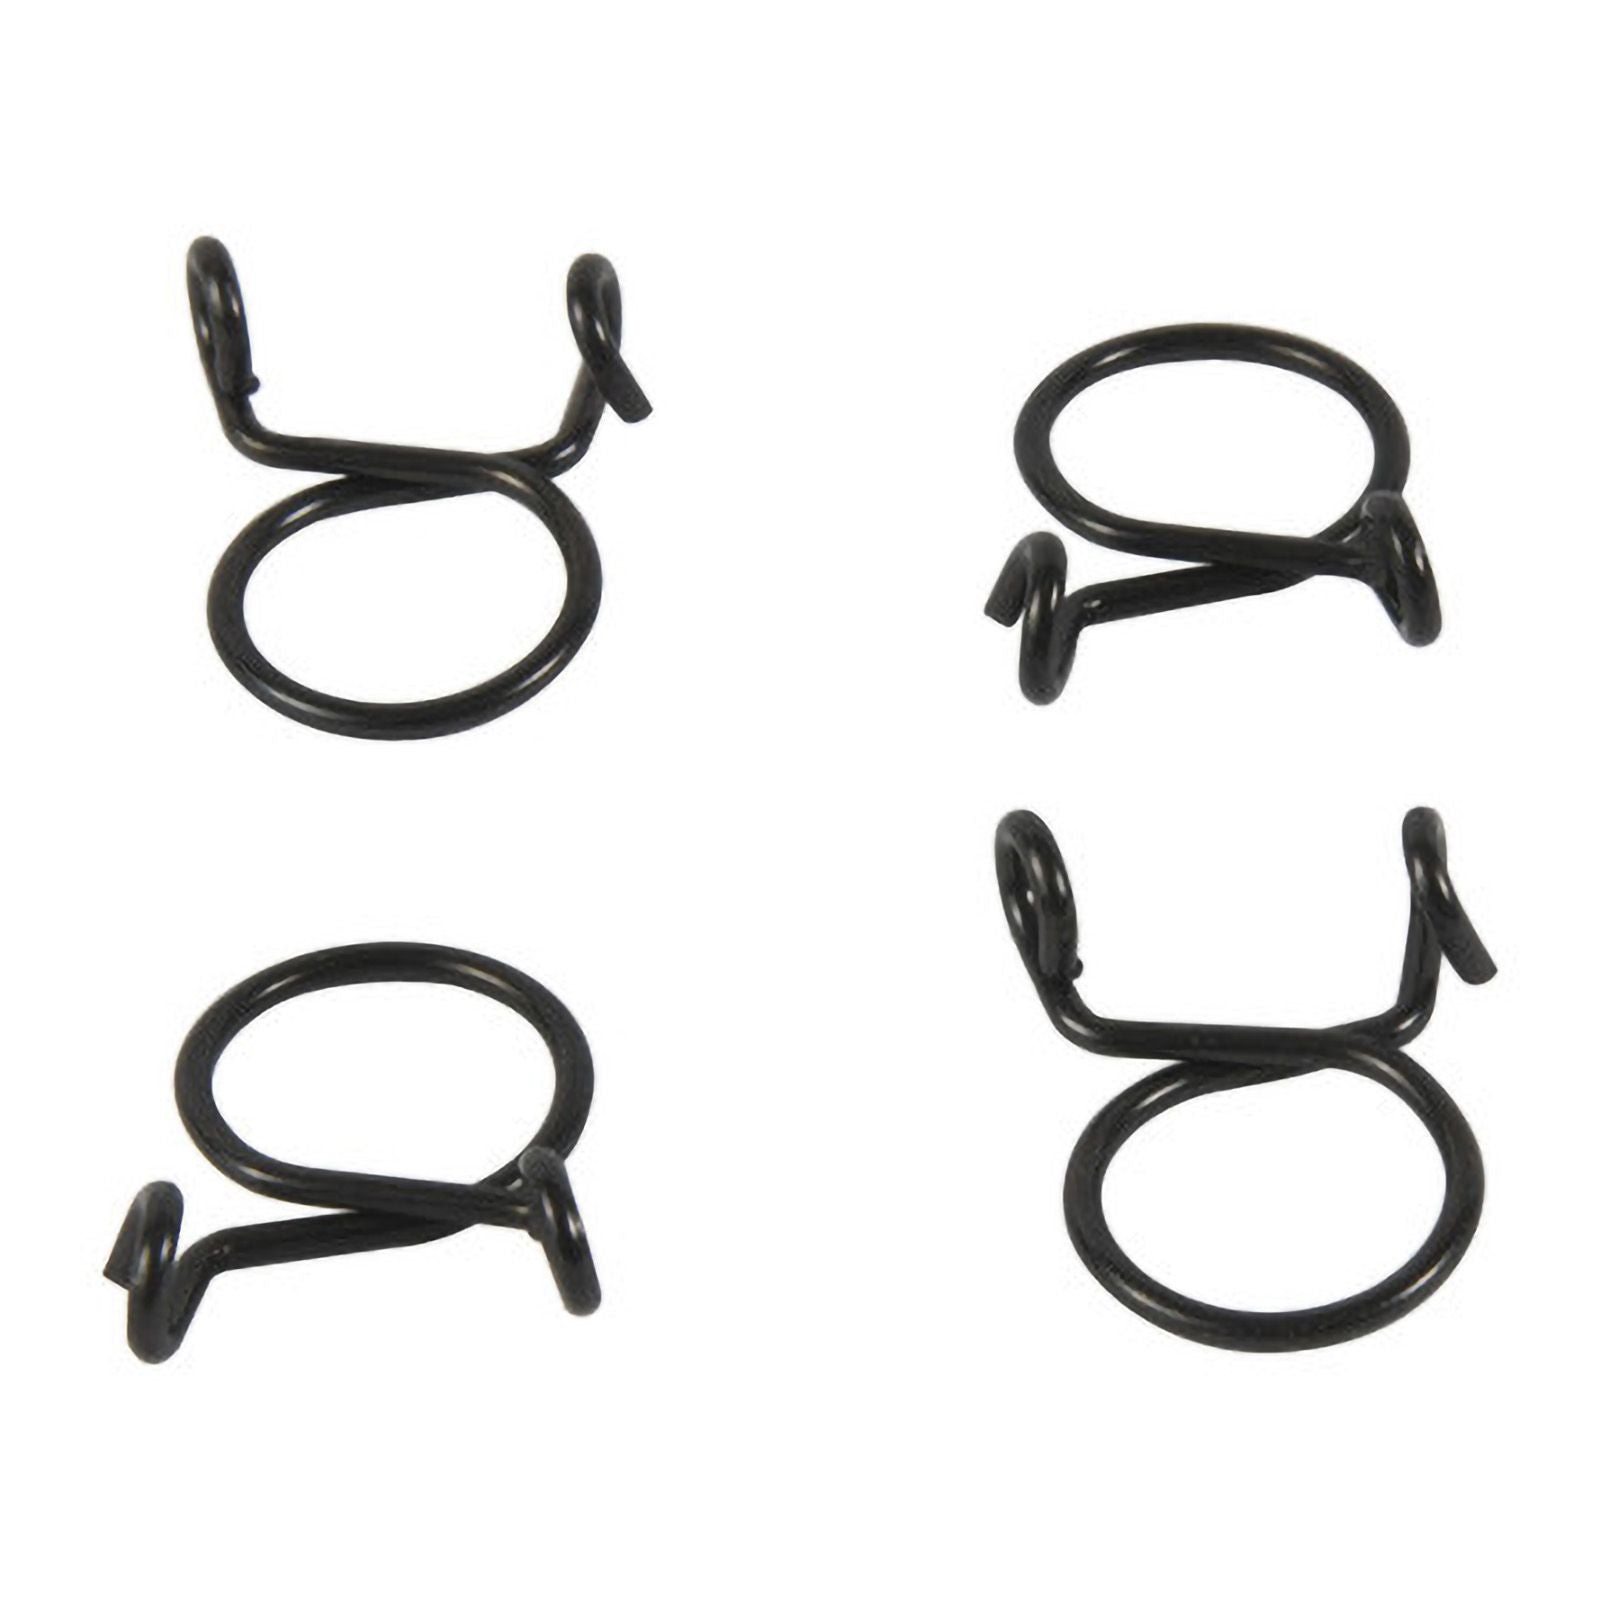 New ALL BALLS Racing Fuel Hose Clamp Kit - 12mm Wire (4 Pack) #ABFS00057